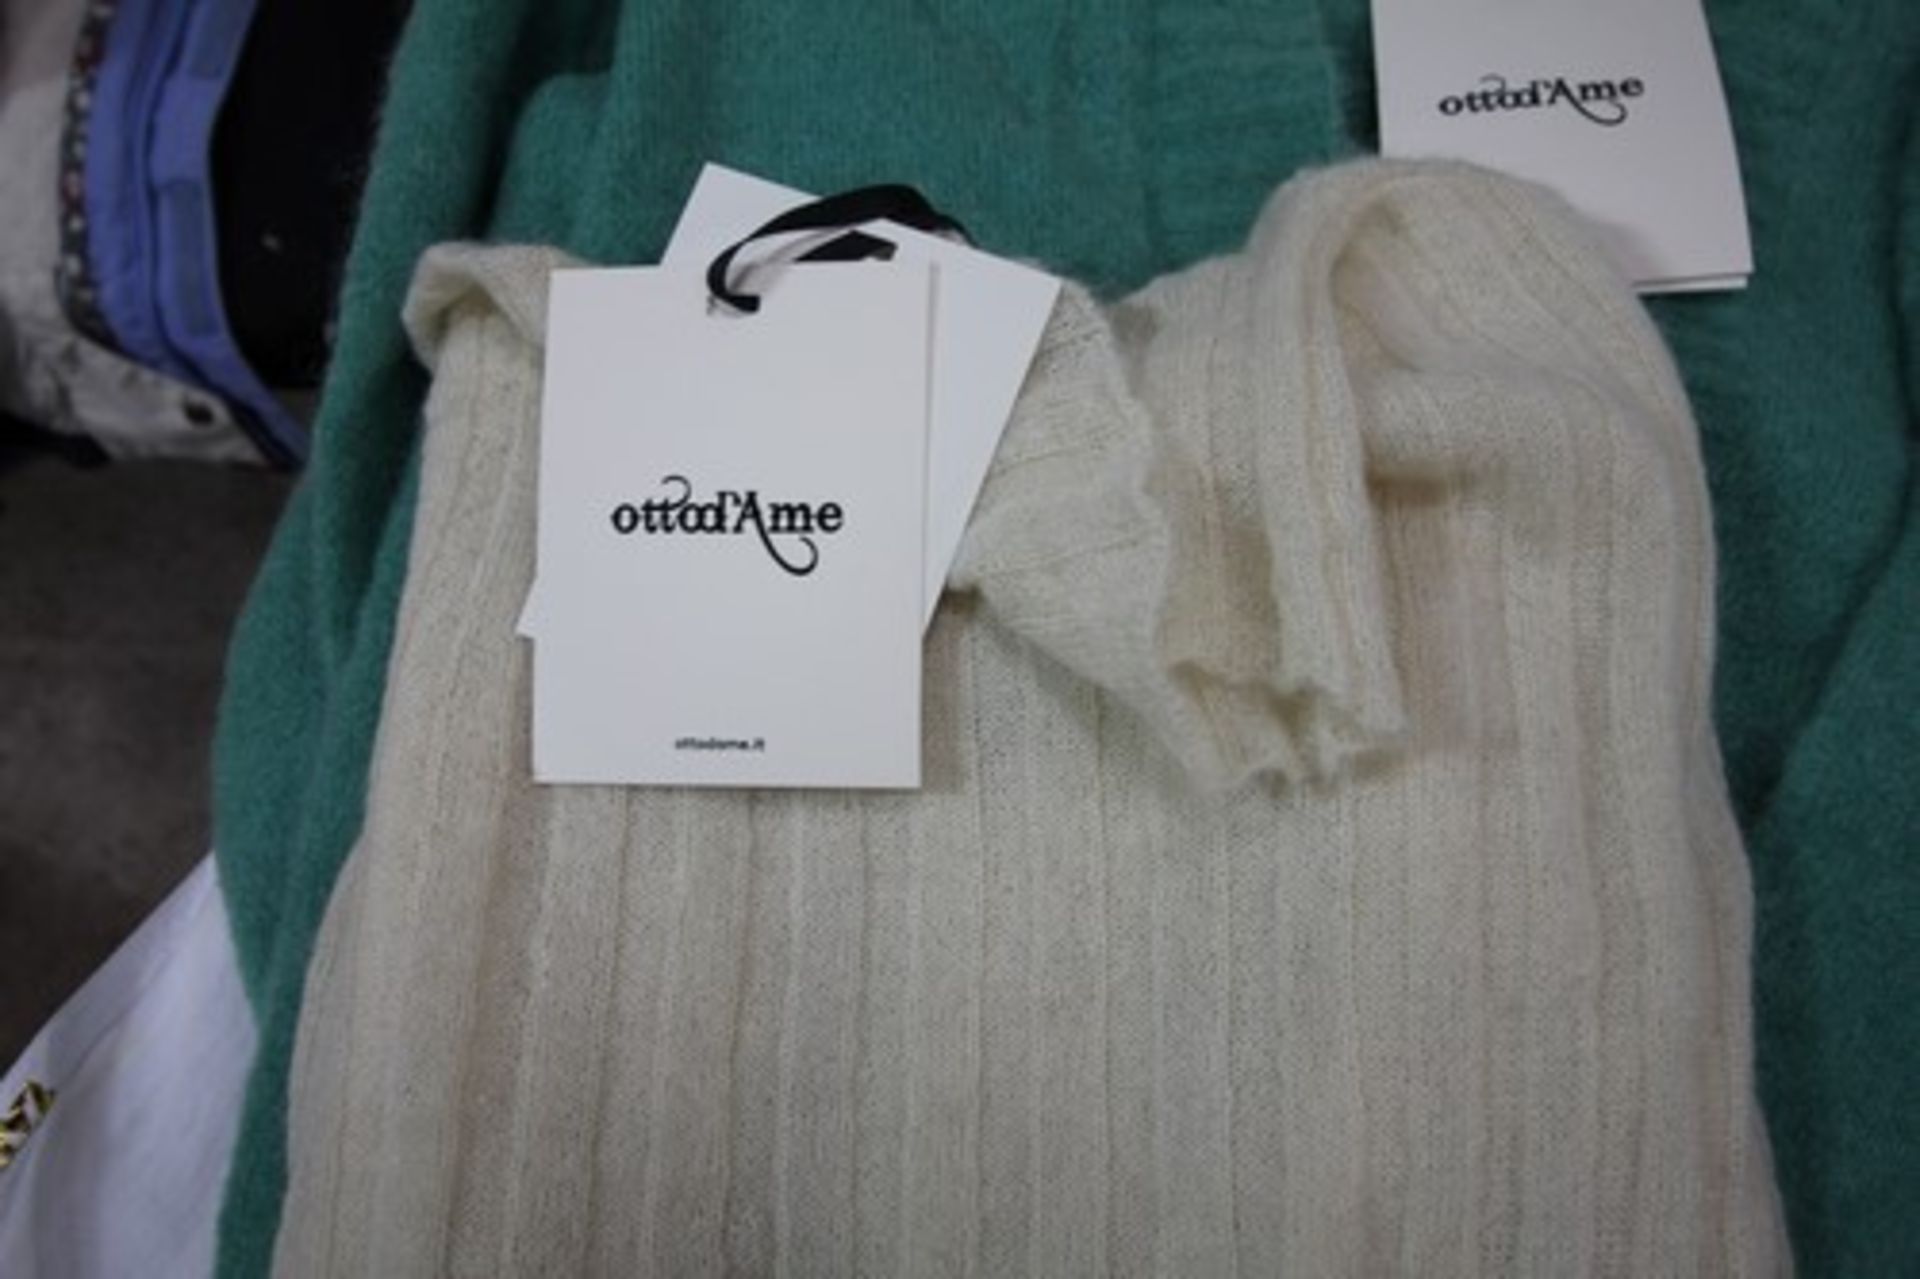 6 x pieces of Ottod Ame in various styles and sizes, some containing alpaca wool and cashmere - - Image 3 of 3